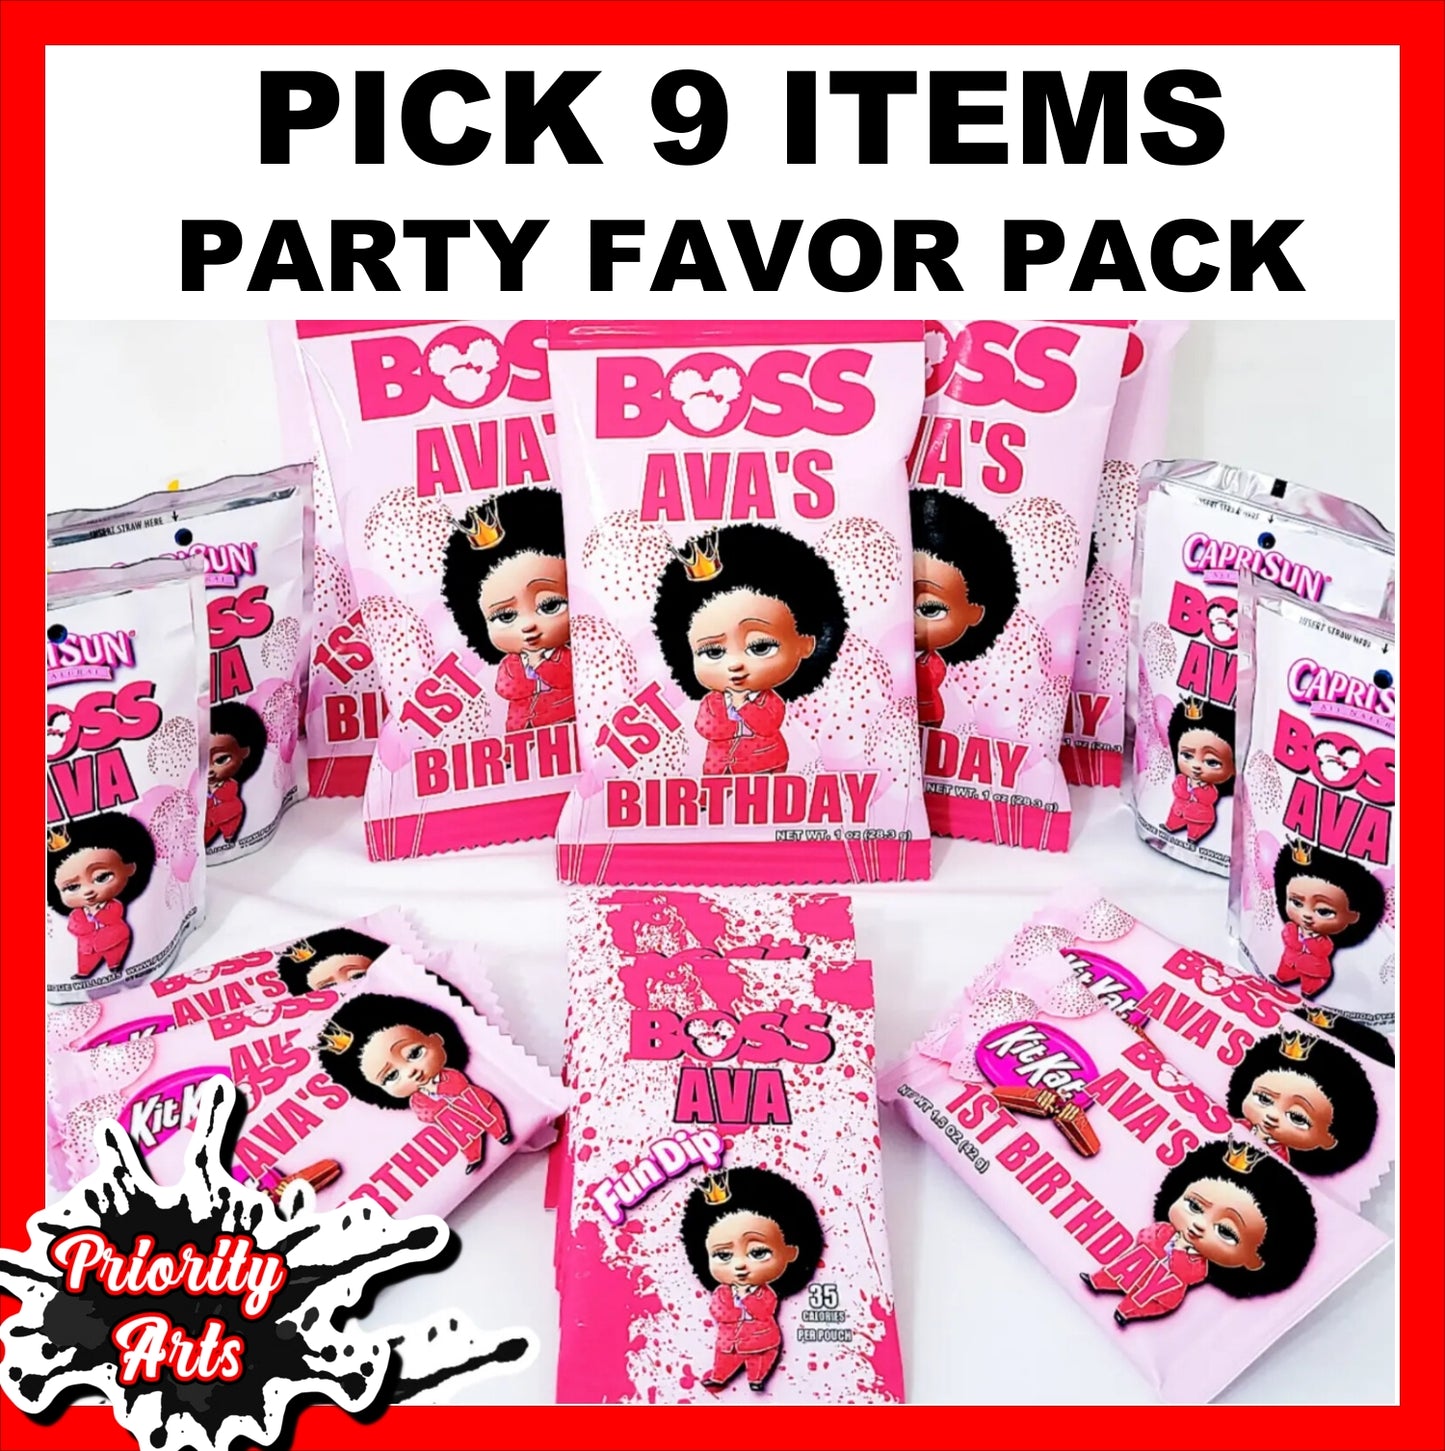 PICK 9 PARTY FAVOR PACKAGE